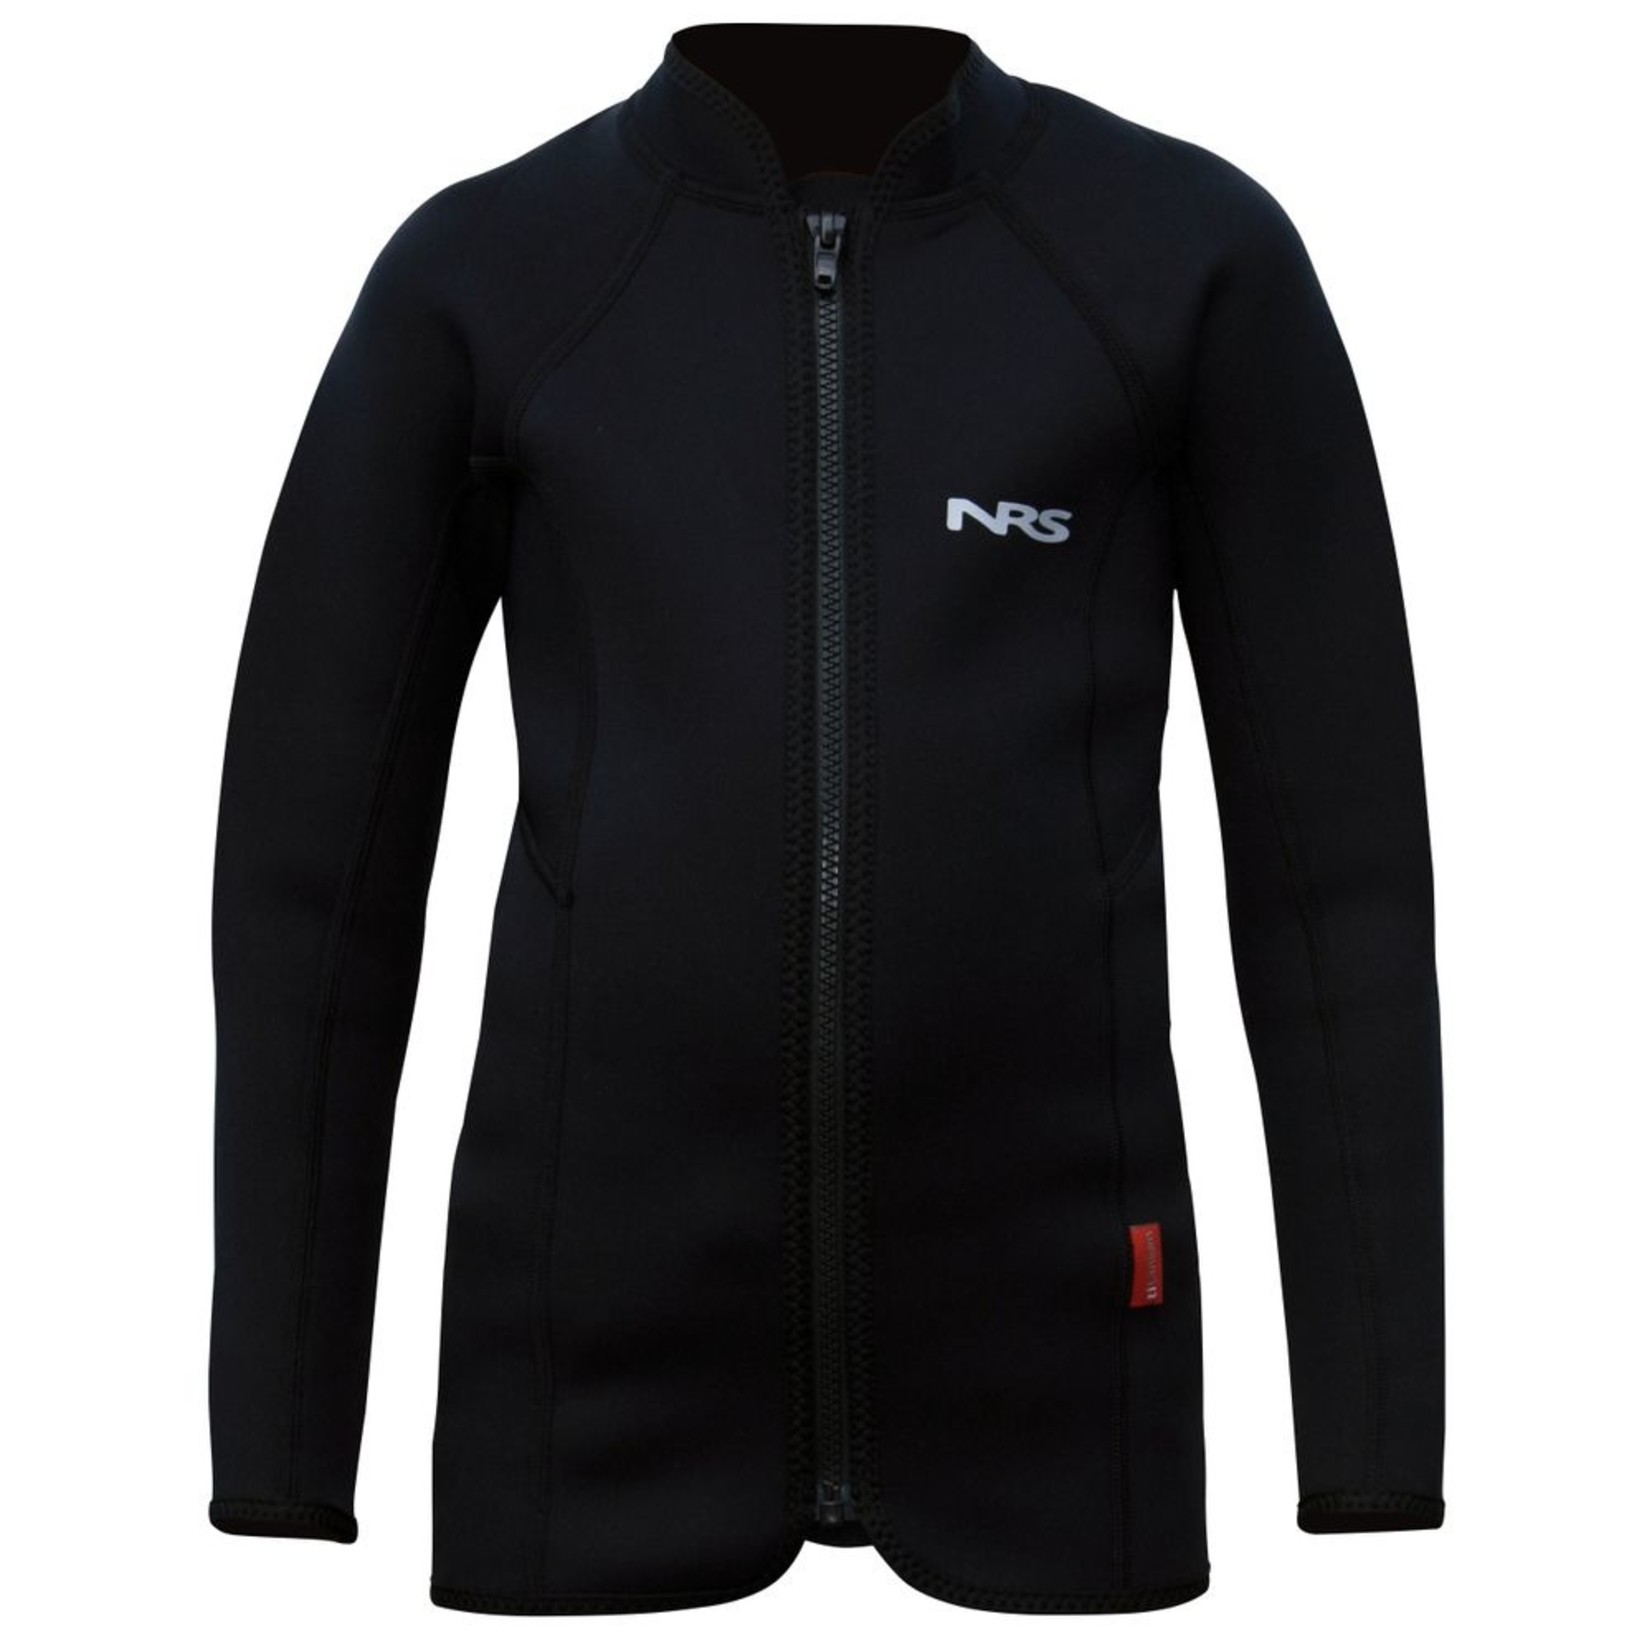 NRS NRS Youth Bill's Wetsuit Jacket